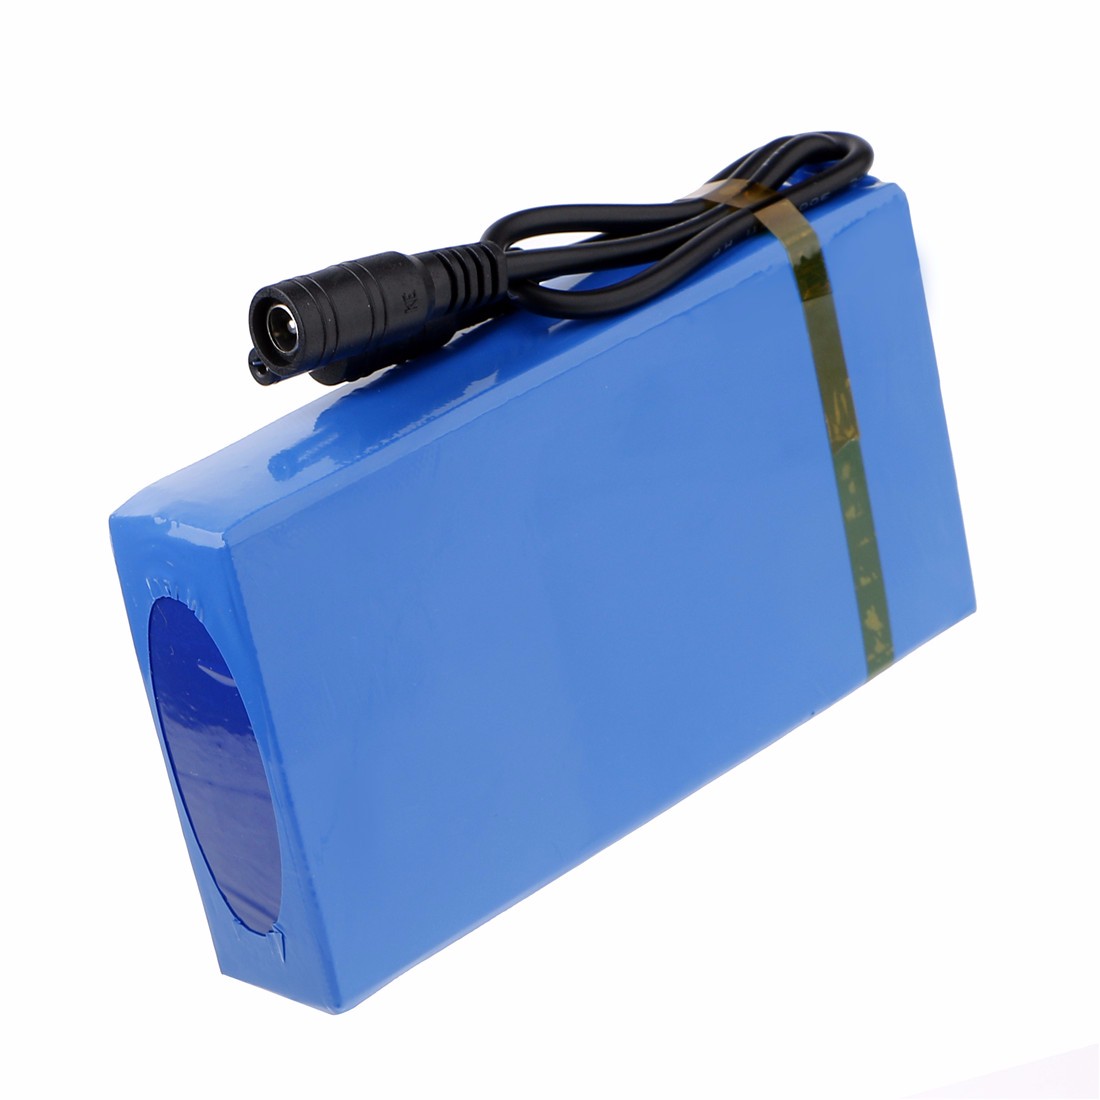 Find DC12V 8000mAh Backup Rechargeable Li ion Battery for CCTV Camera US Plug Motor Monitoring for Sale on Gipsybee.com with cryptocurrencies